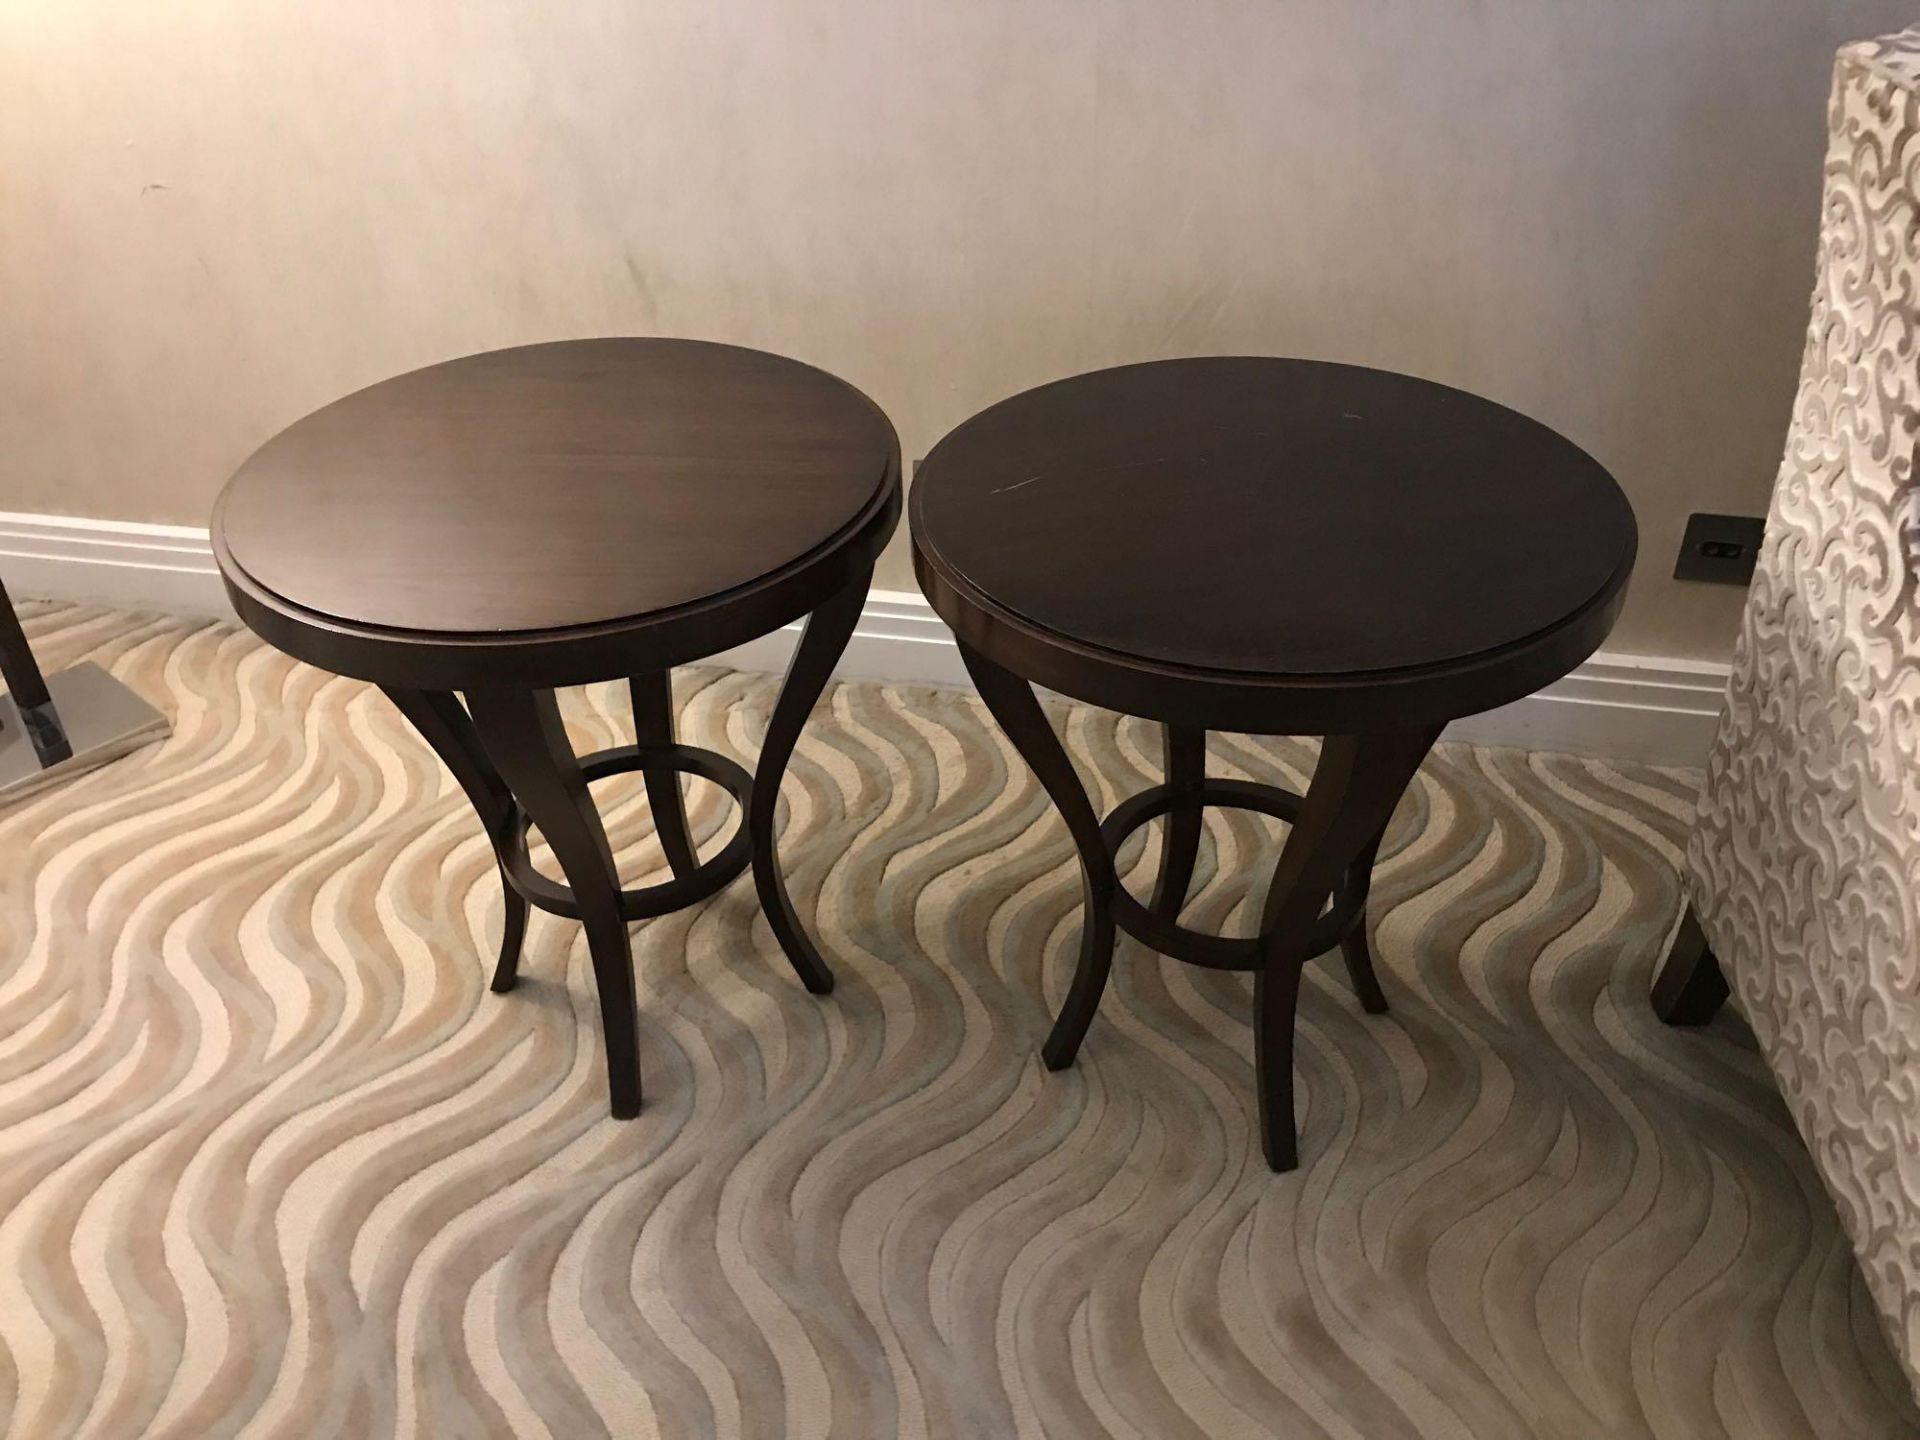 Pair Of Mahogany Side Tables With Tapering Legs And Circular Stretcher 55cm Diameter 60cm High